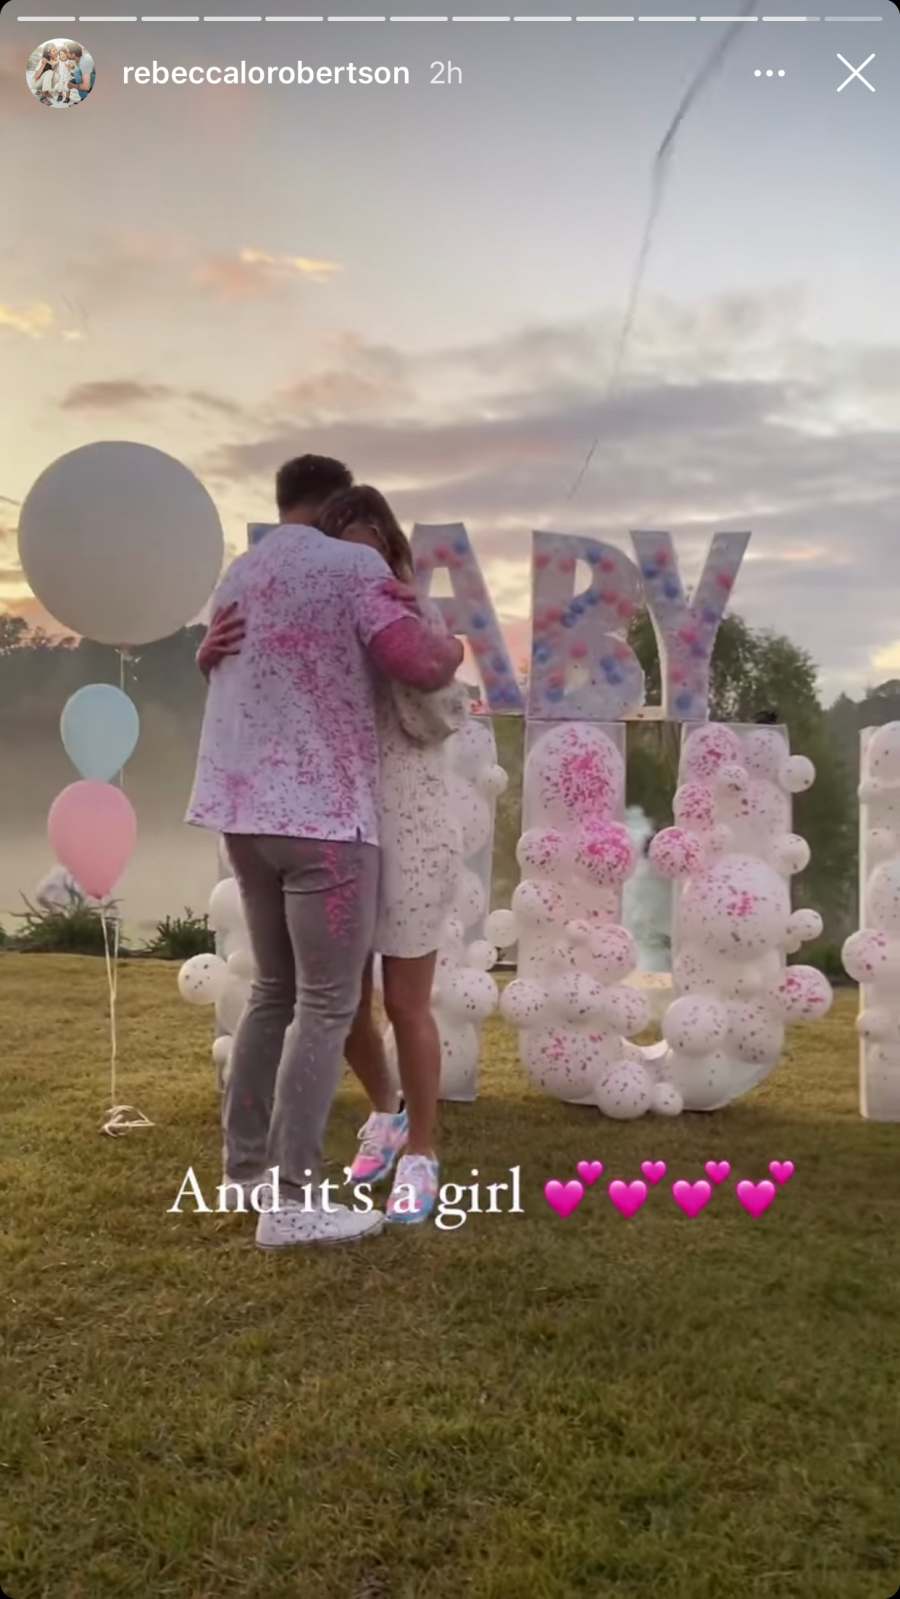 Pregnant Sadie Robertson Reveals Sex of 1st Child With Husband Christian Huff